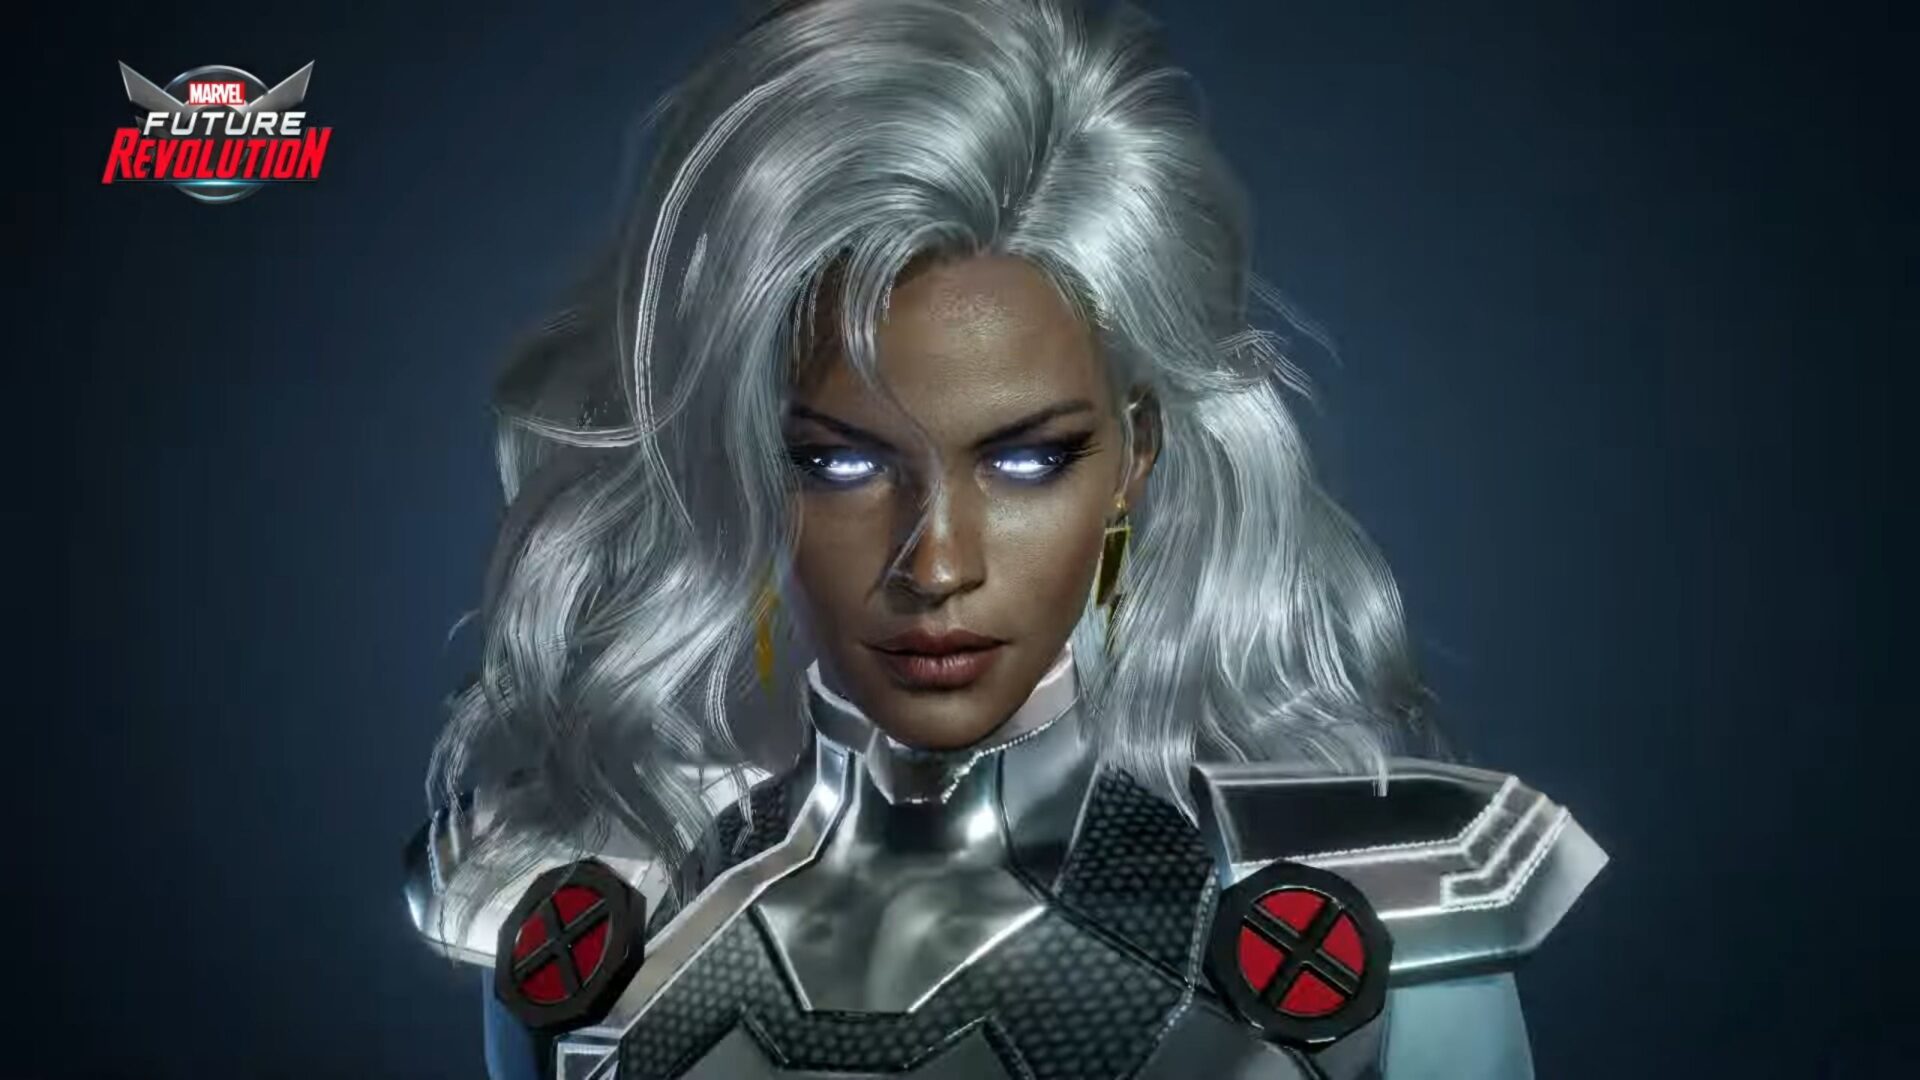 Marvel Future Revolution Gets New Trailer All About Storm